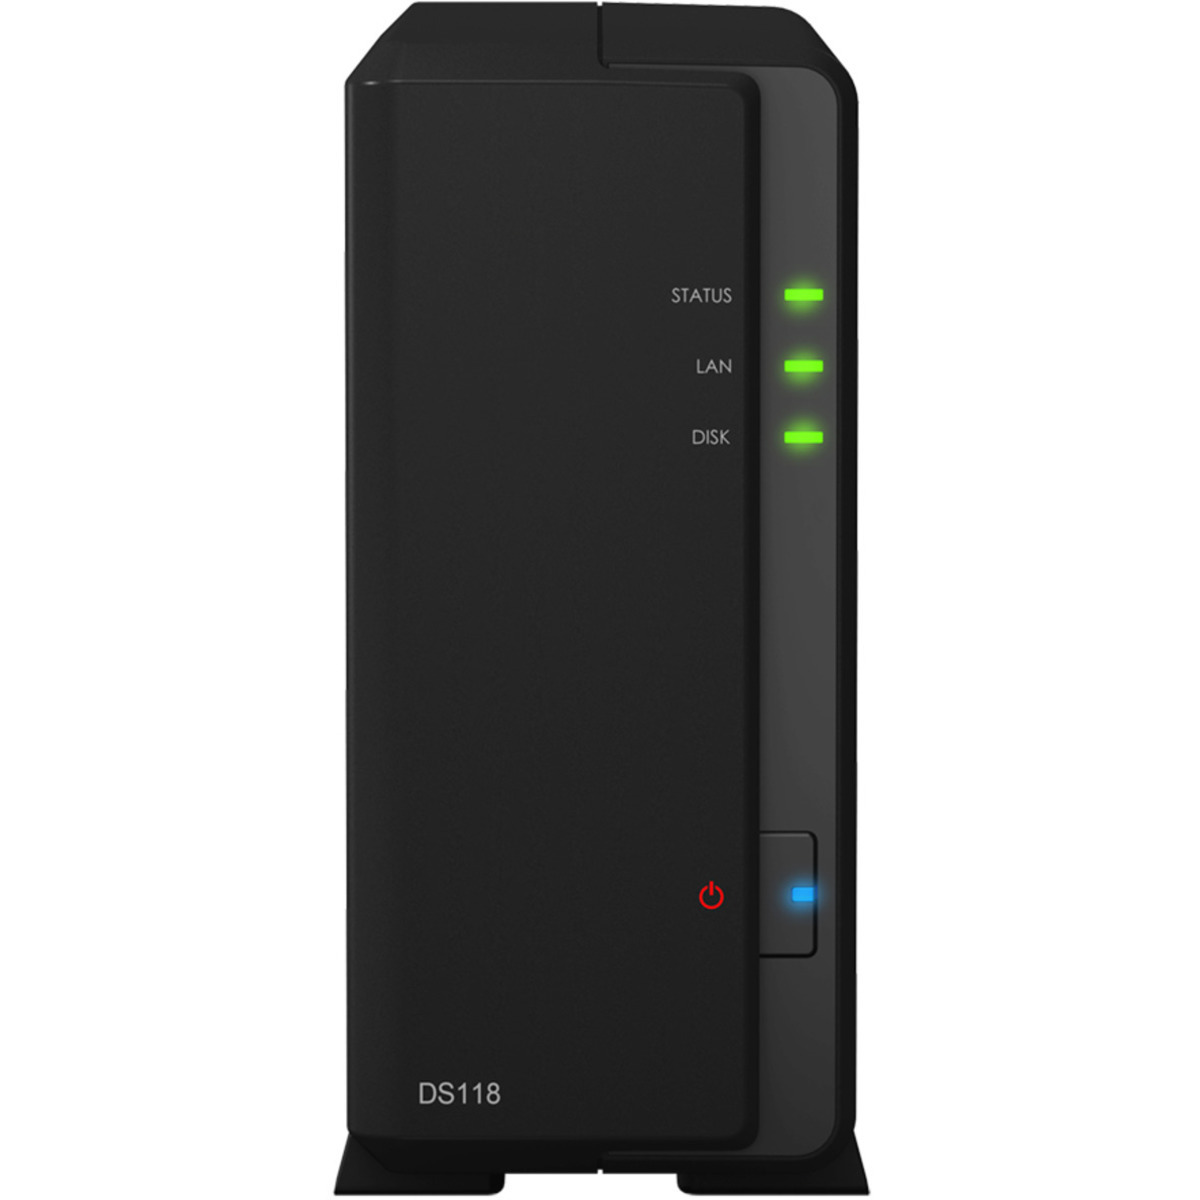 buy $309 Synology DiskStation DS118 2tb Desktop NAS - Network Attached Storage Device 1x2000gb Seagate BarraCuda ST2000DM008 3.5 7200rpm SATA 6Gb/s HDD CONSUMER Class Drives Installed - Burn-In Tested - ON SALE - nas headquarters buy network attached storage server device das new raid-5 free shipping usa christmas new year holiday sale DiskStation DS118